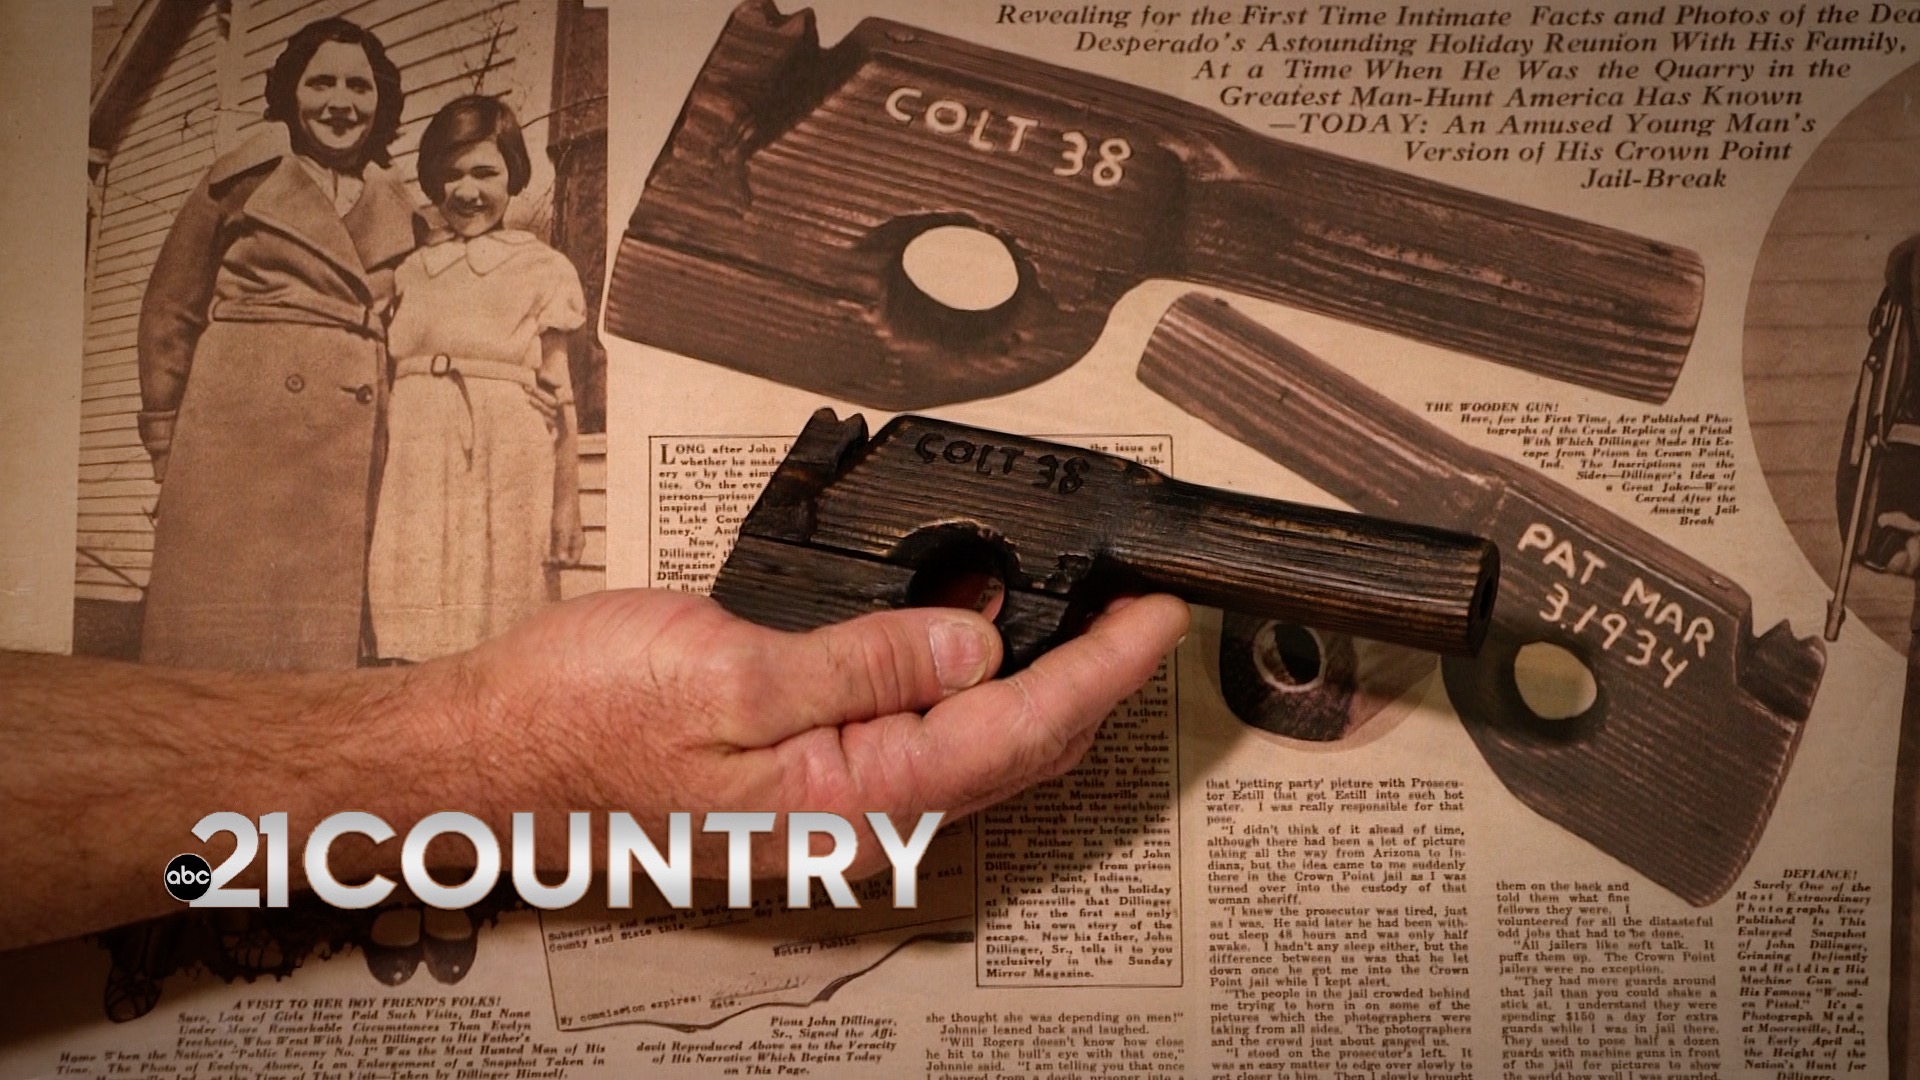 21Country: Has John Dillinger's infamous wooden gun been discovered?